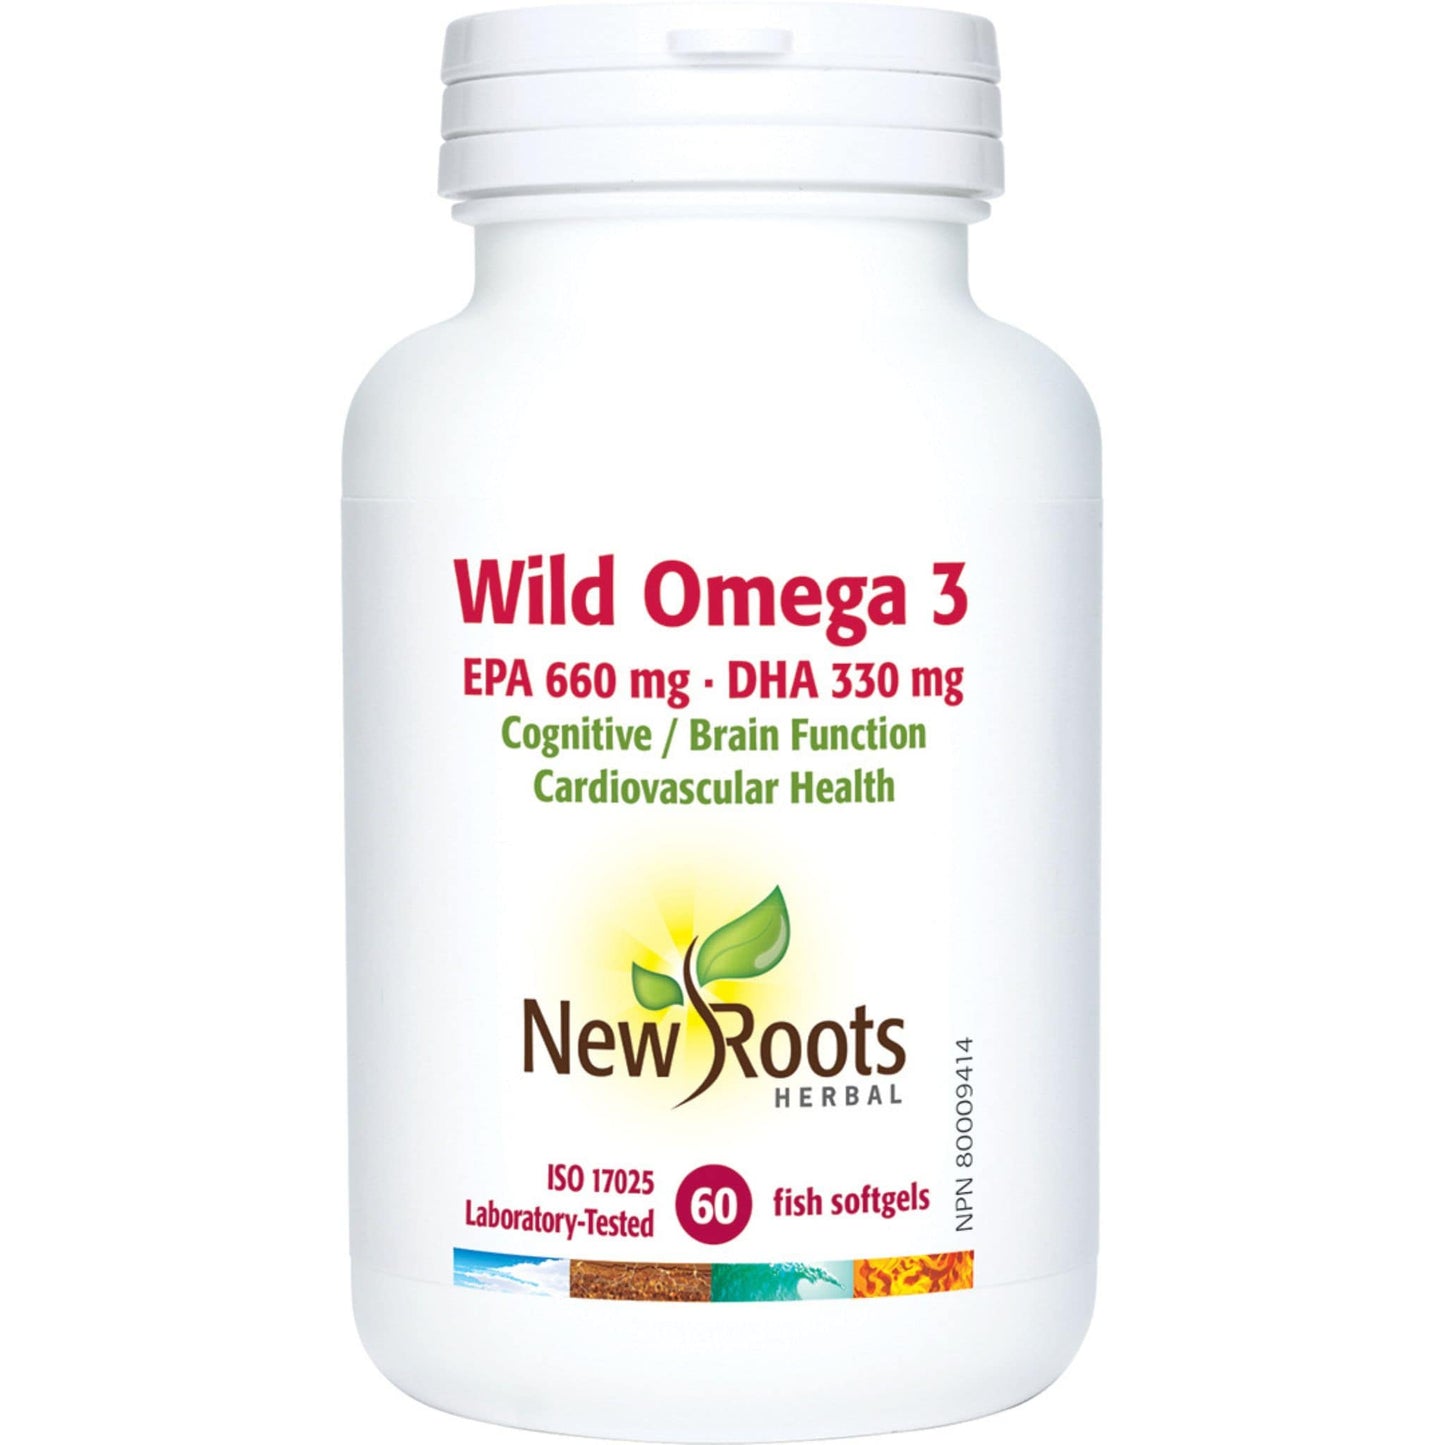 Natural Flavour 60 Softgels | New Roots Herbal Wild Omega 3 EPA 660 Mg - DHA 330 Mg // natural flavour